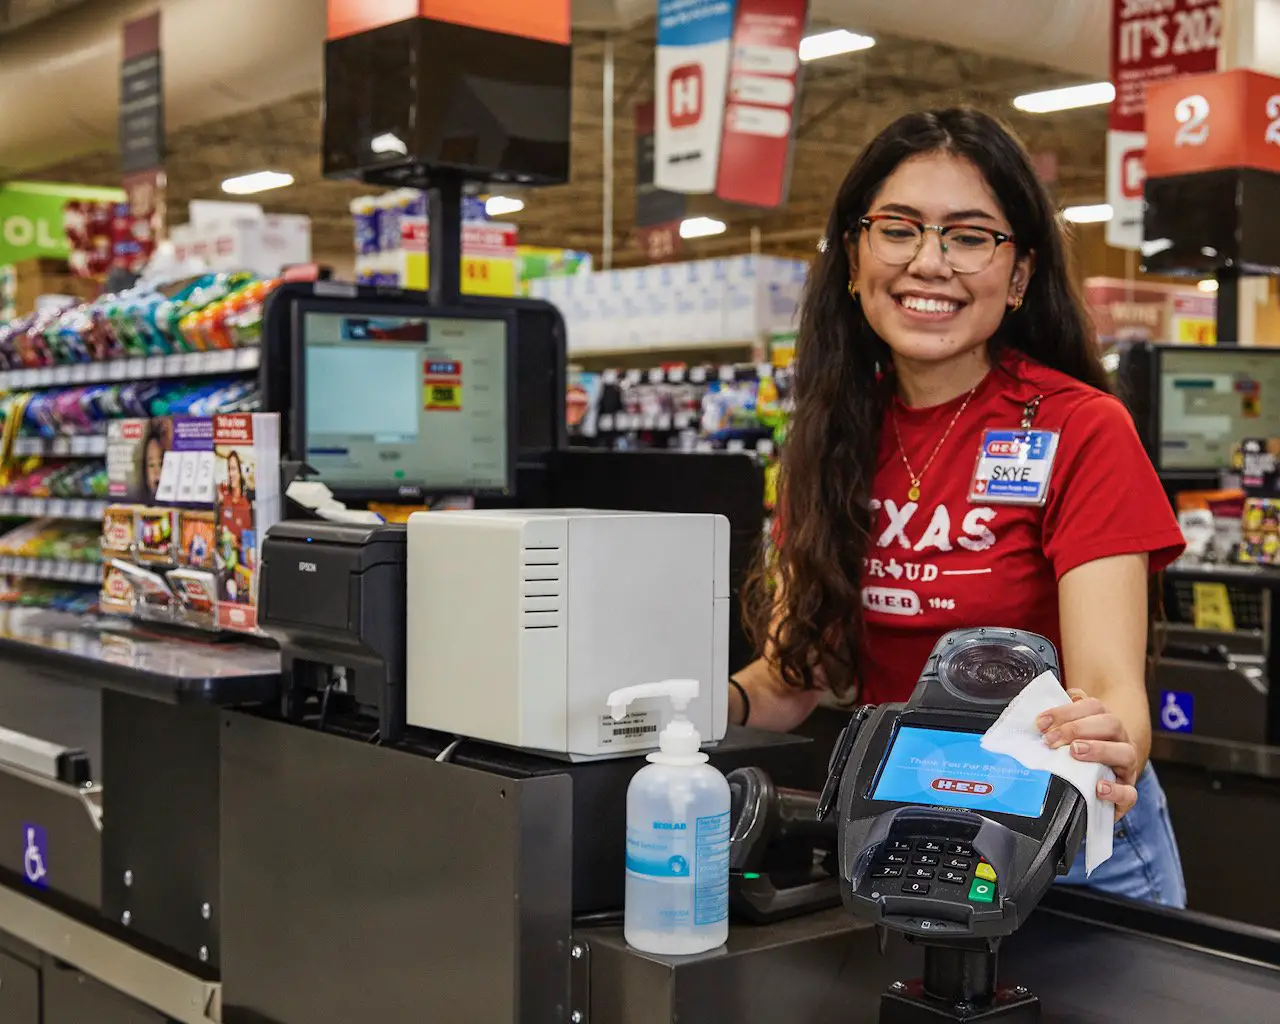 What Benefits Does Heb Offer Employees